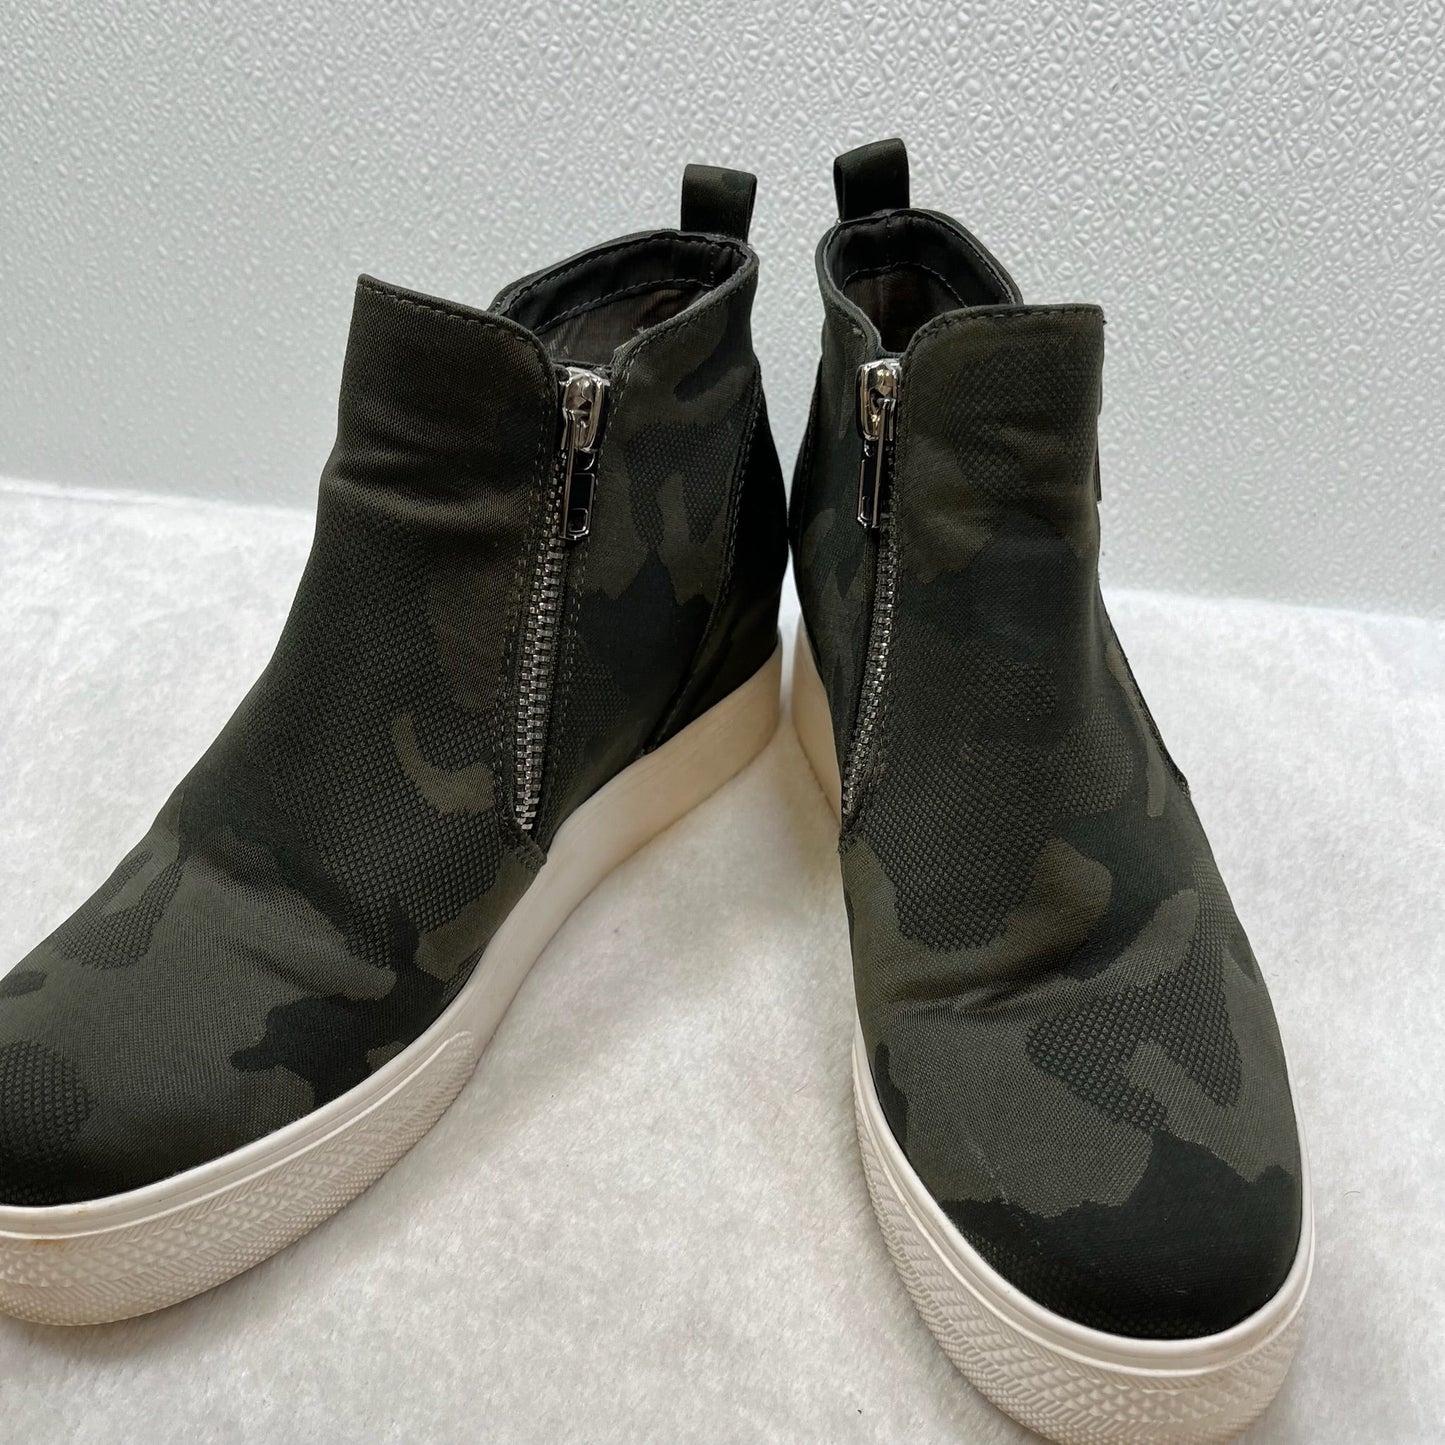 Shoes Sneakers By Steve Madden  Size: 9.5